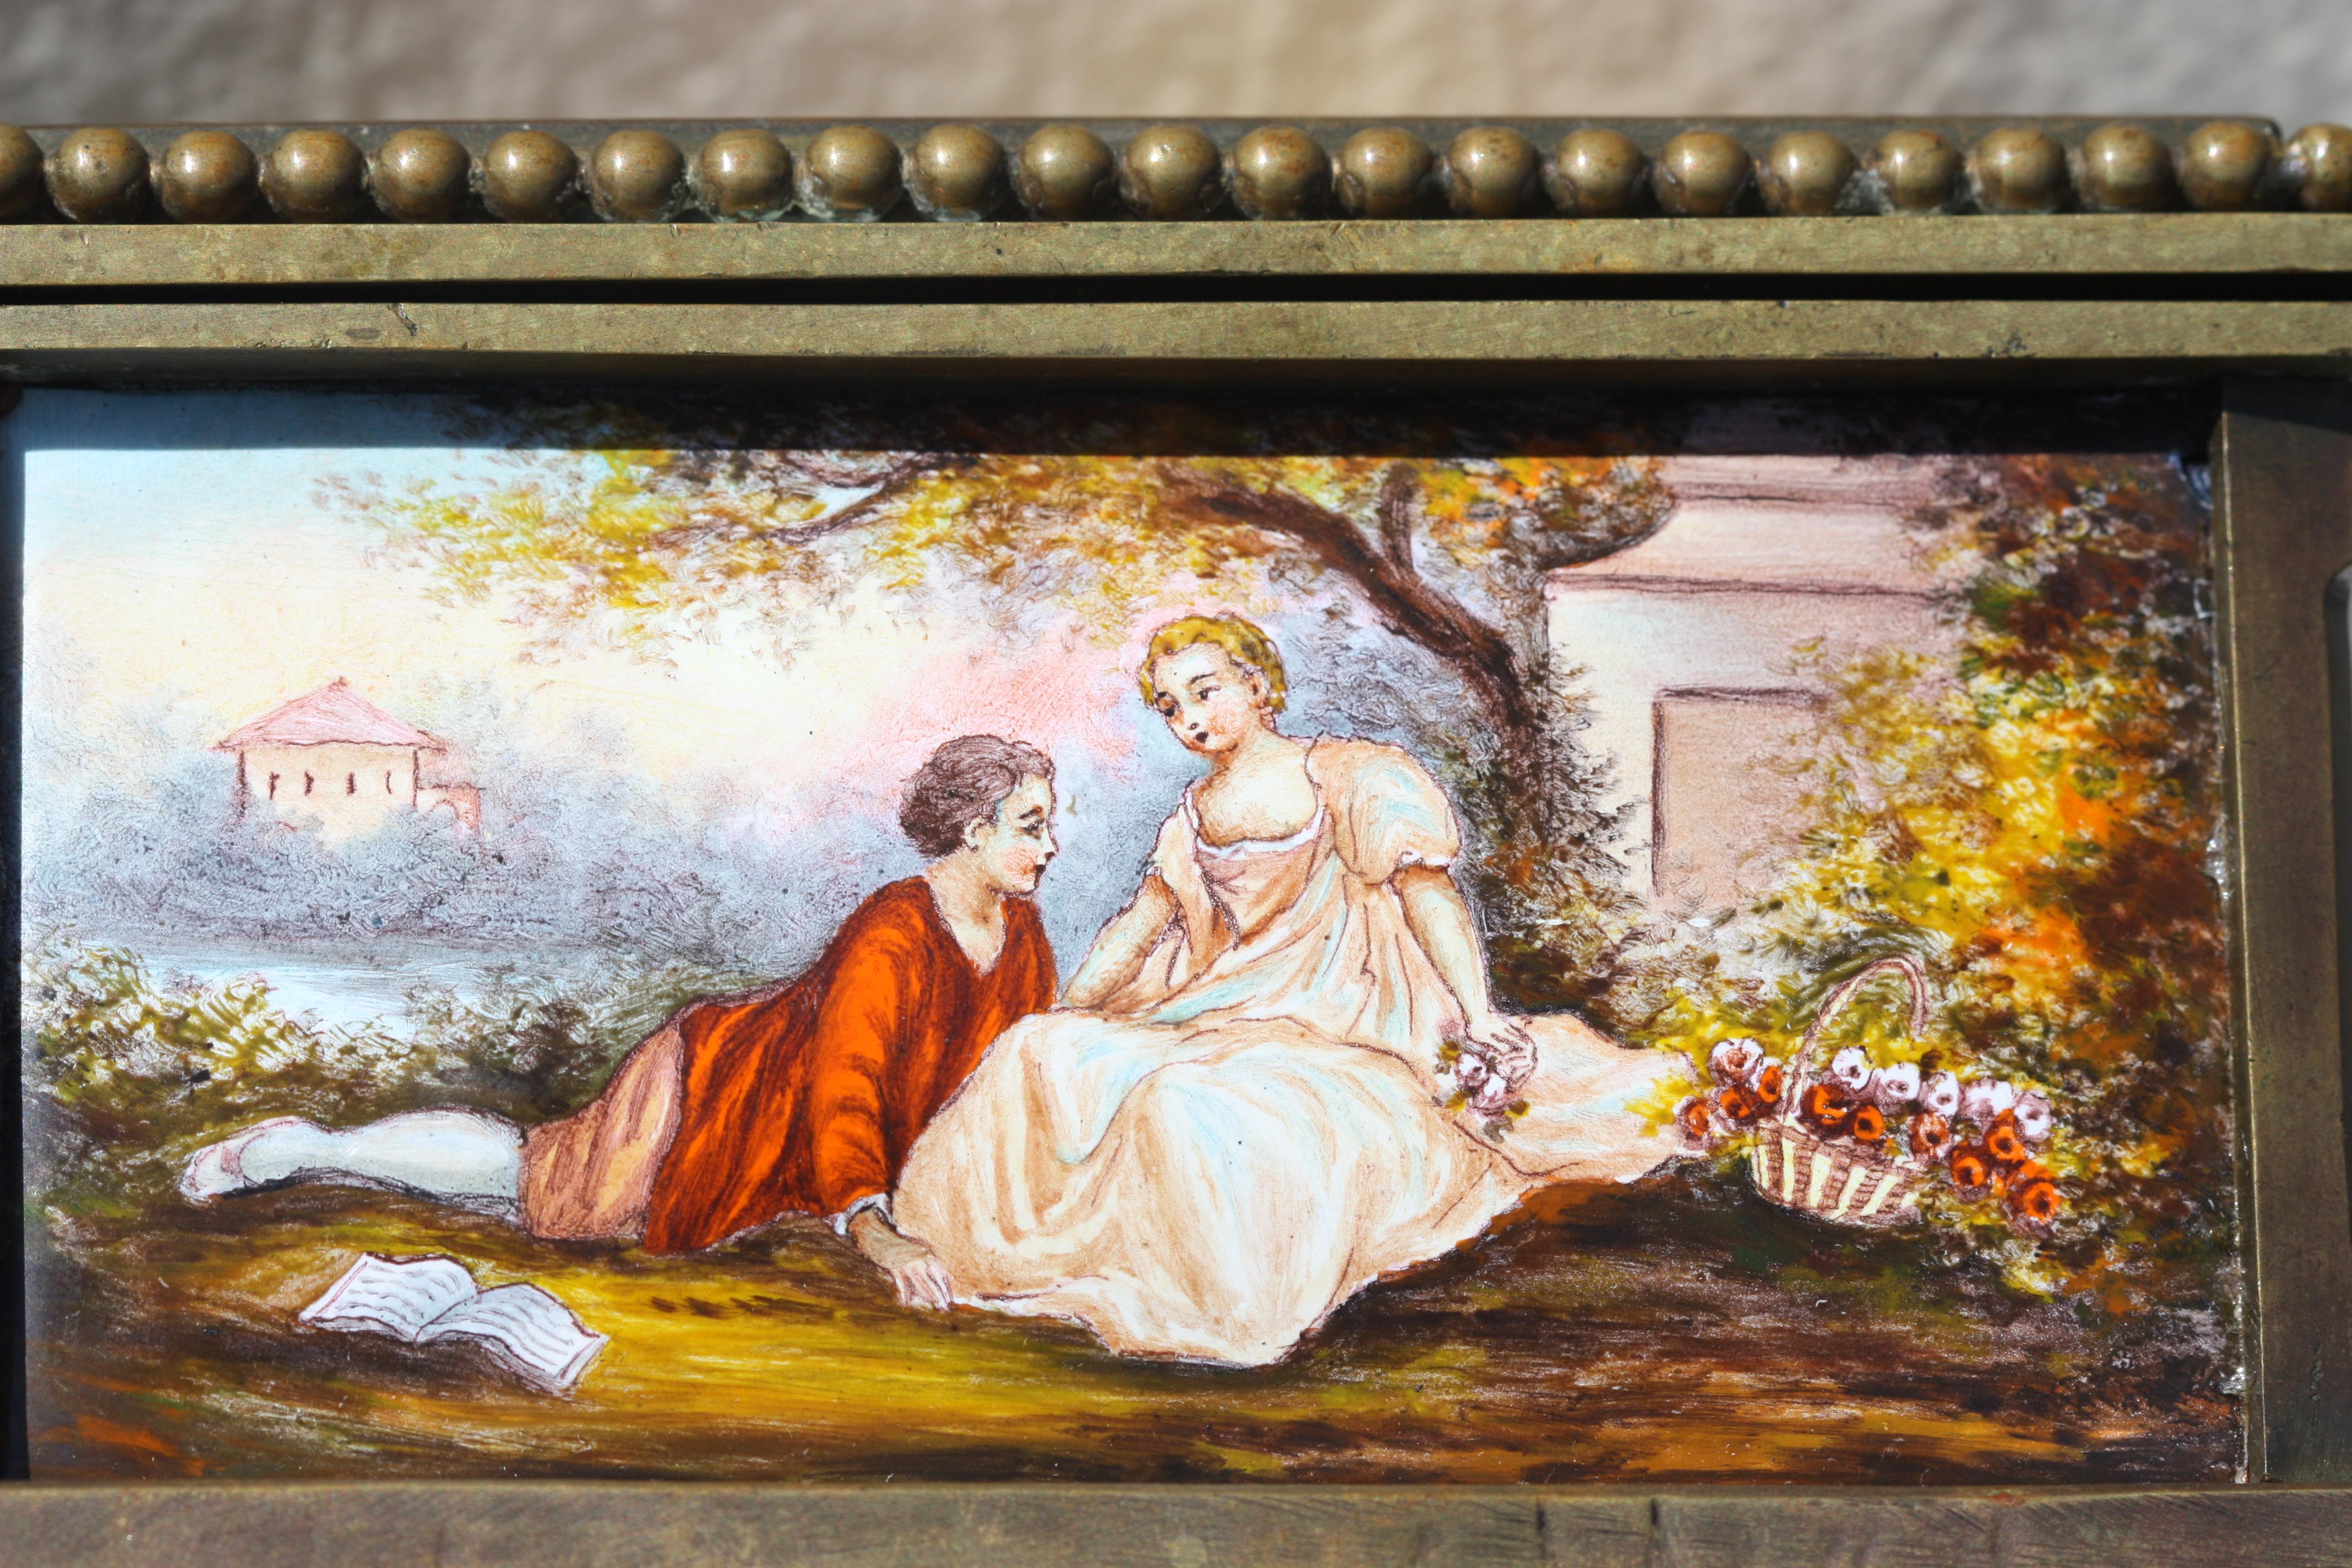 A Viennese enamel & bronze box. Decorated with five romantic panels. 
Measures: Height 3 in. (7.62 cm.), 
Width 4.75 in. (12.06 cm.), 
Depth 3.5 in. (8.89 cm.).
  